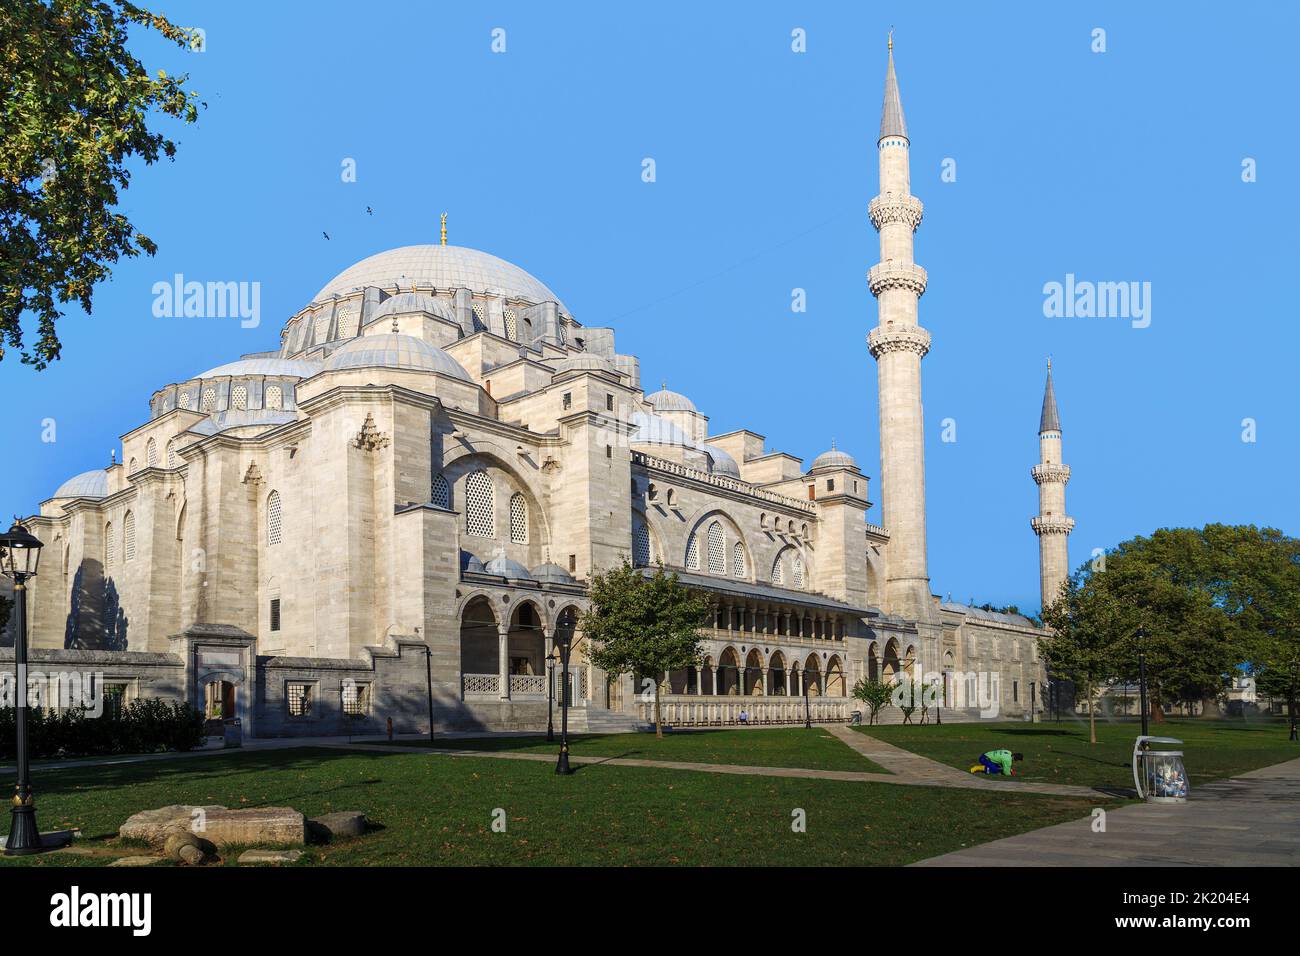 ISTANBUL, TURKEY - SEPTEMBER 14, 2017: This is the famous Suleymaniye Mosque, built in the 16th century by the architect Sinan. Stock Photo